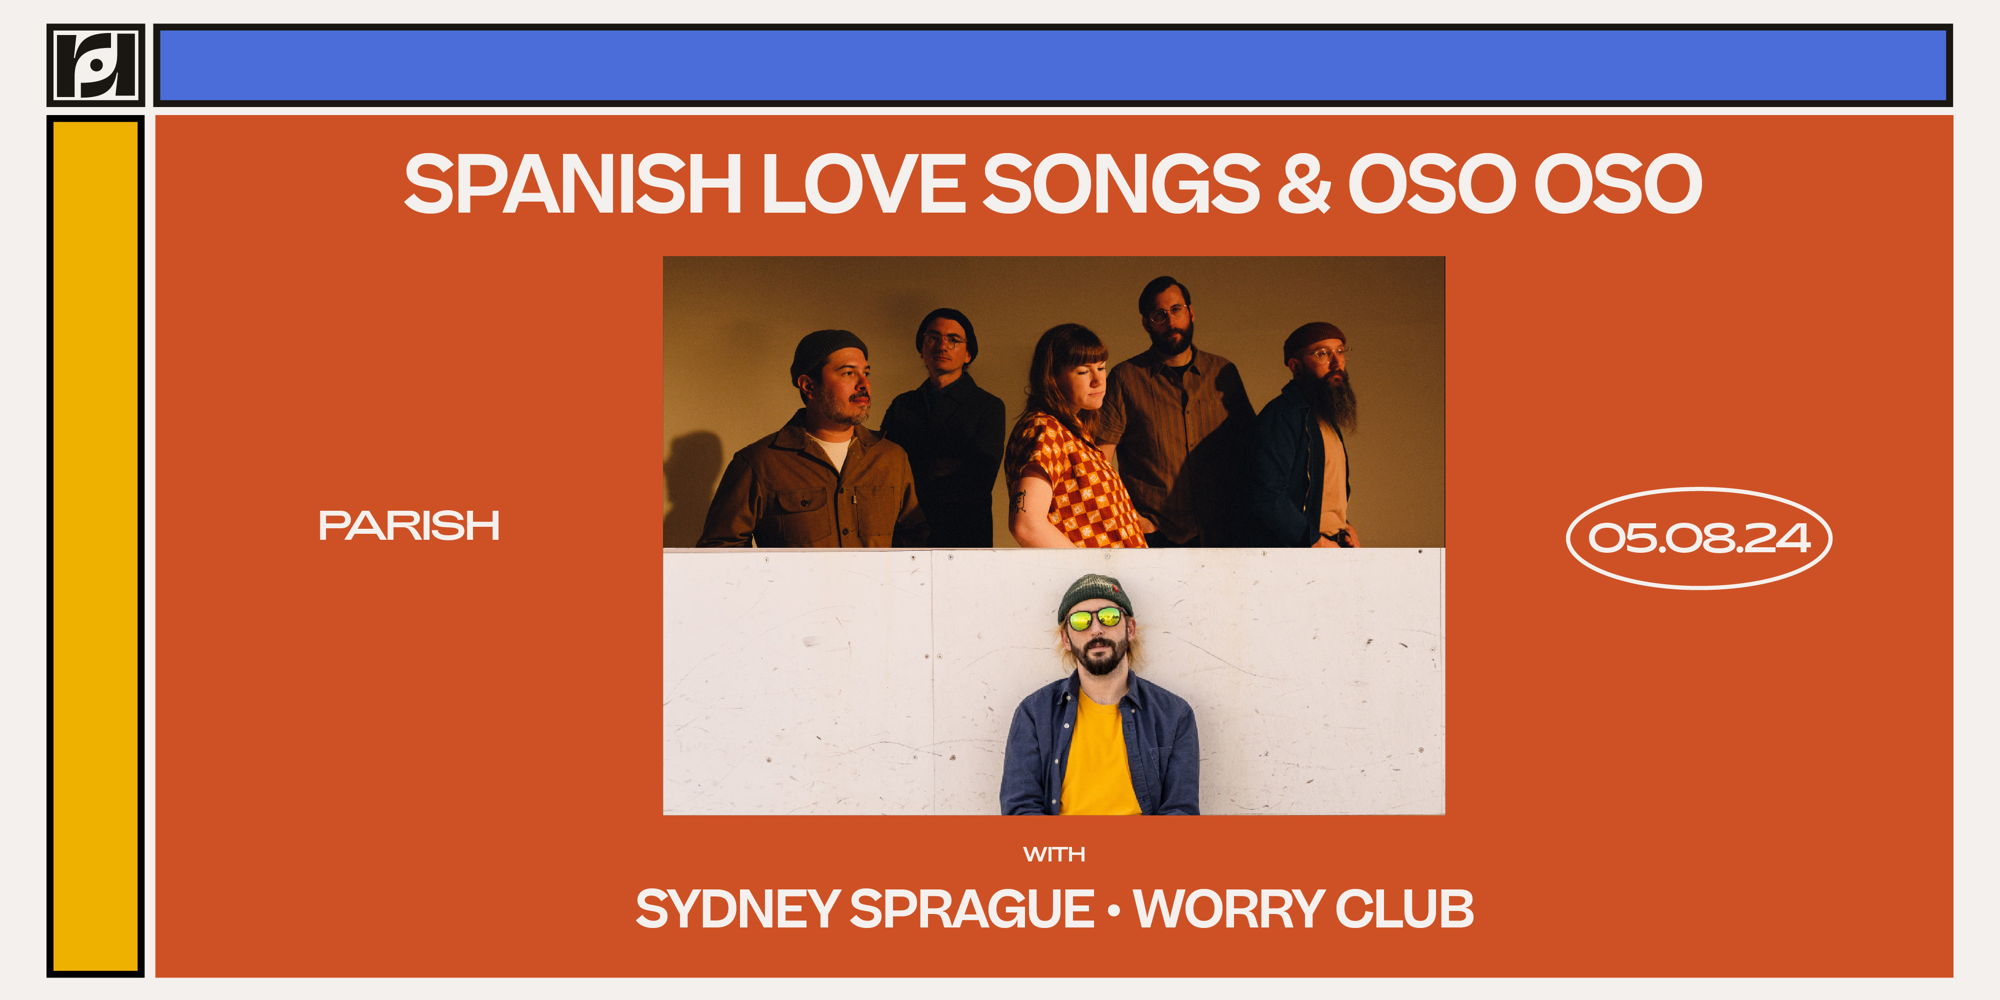 Resound Presents: Spanish Love Songs & Oso Oso w/ Sydney Sprague and Worry Club at Parish on 5/8 promotional image